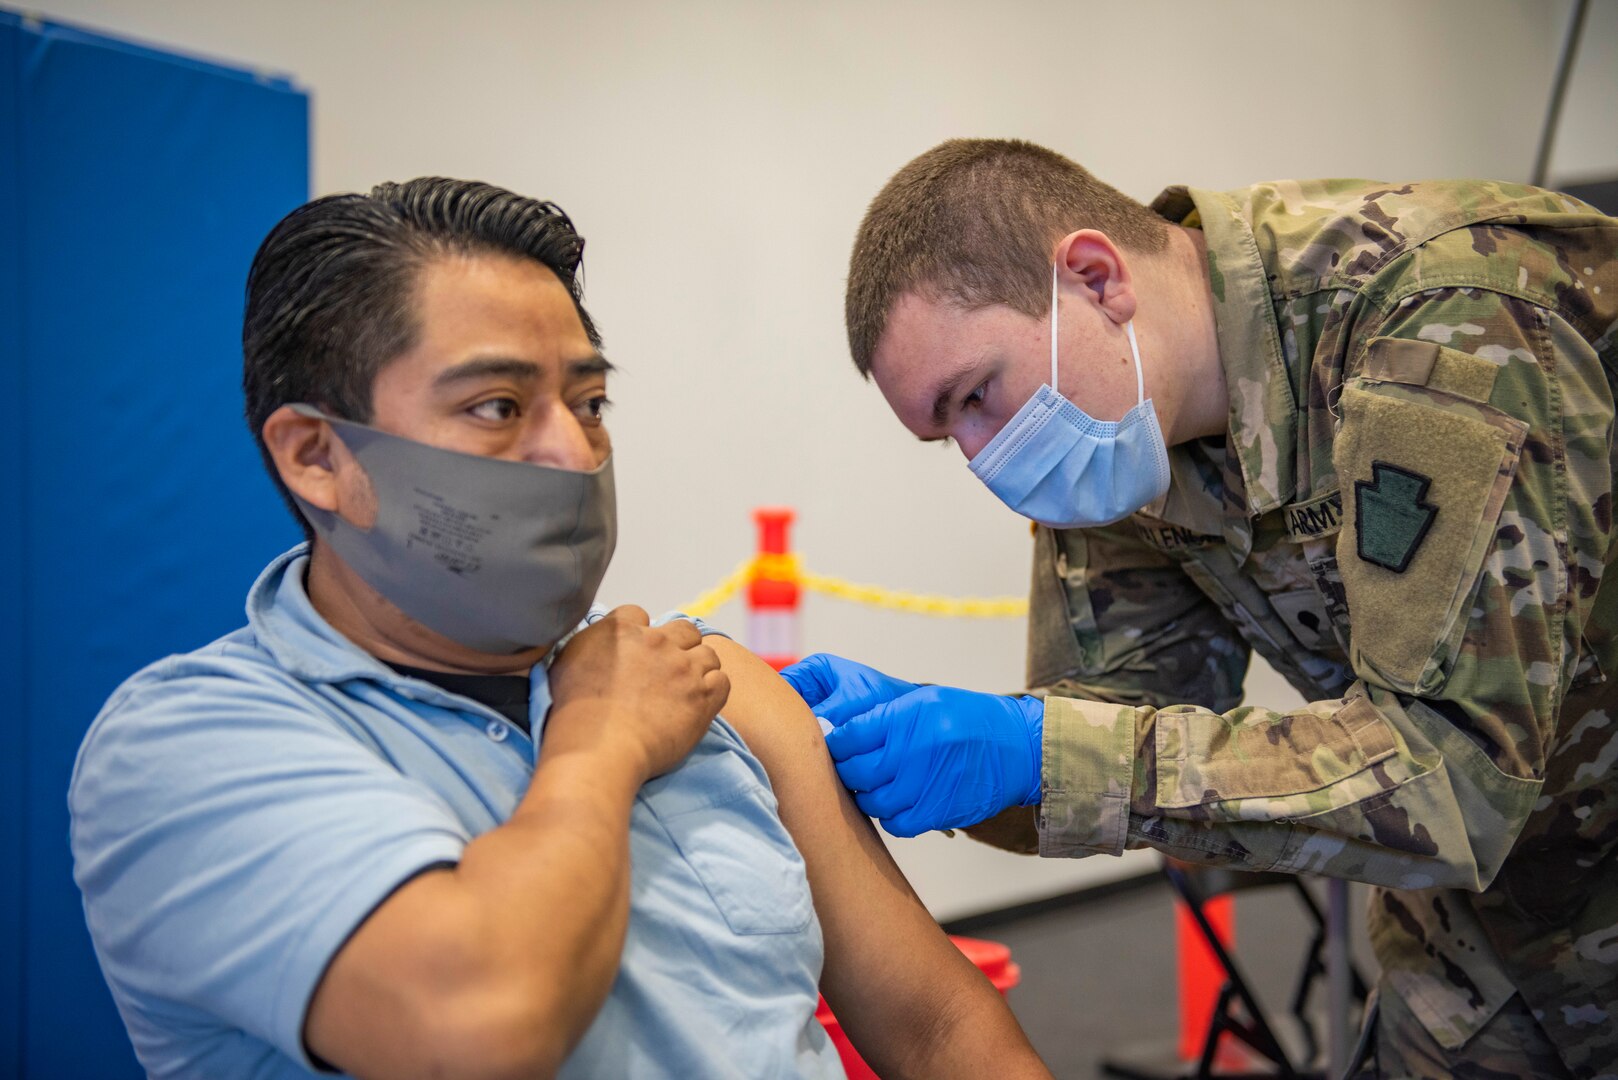 Spc. Christopher Valencia, combat medical specialist with Headquarters and Headquarters Company, 1st Battalion, 112 Infantry Regiment administers a COVID-19 vaccine to Romero Sergio at the Esperanza Community Vaccination Center in Philadelphia on May 17, 2021.